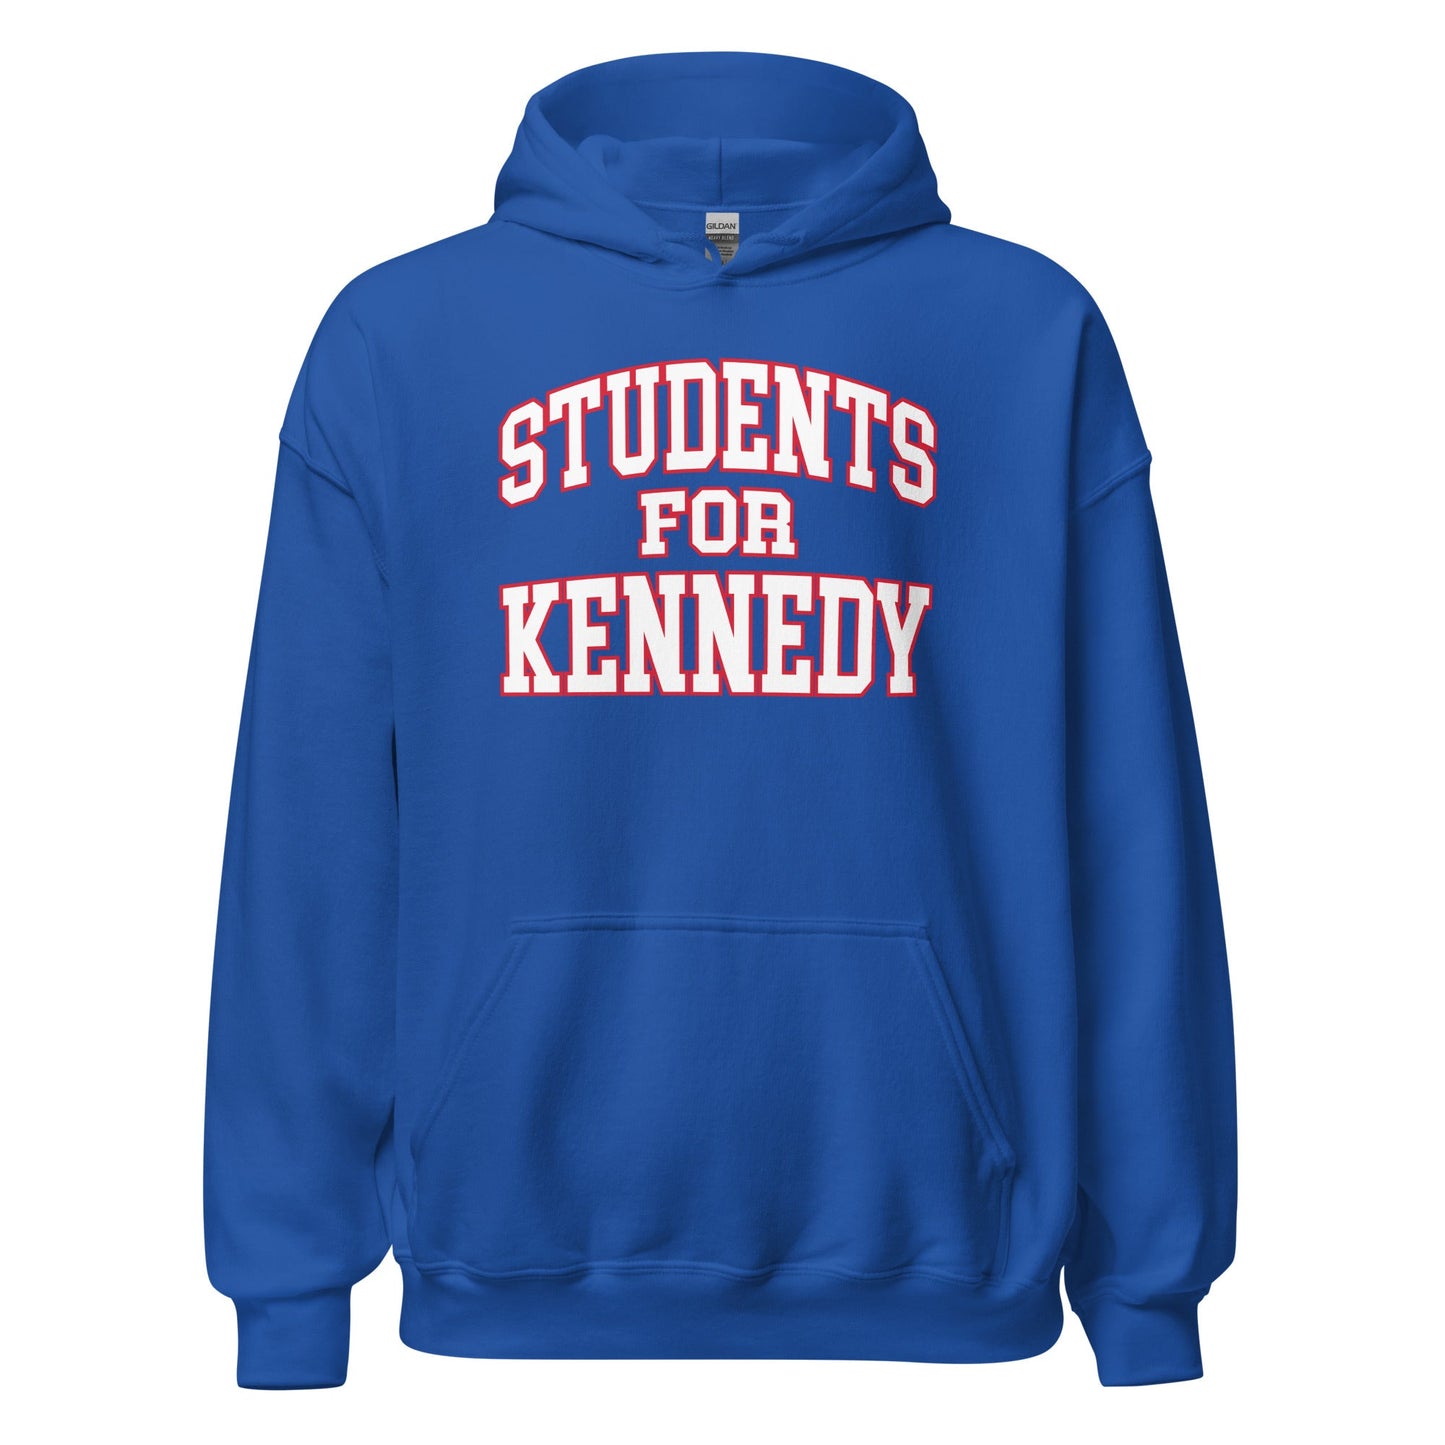 Students for Kennedy Unisex Hoodie - TEAM KENNEDY. All rights reserved